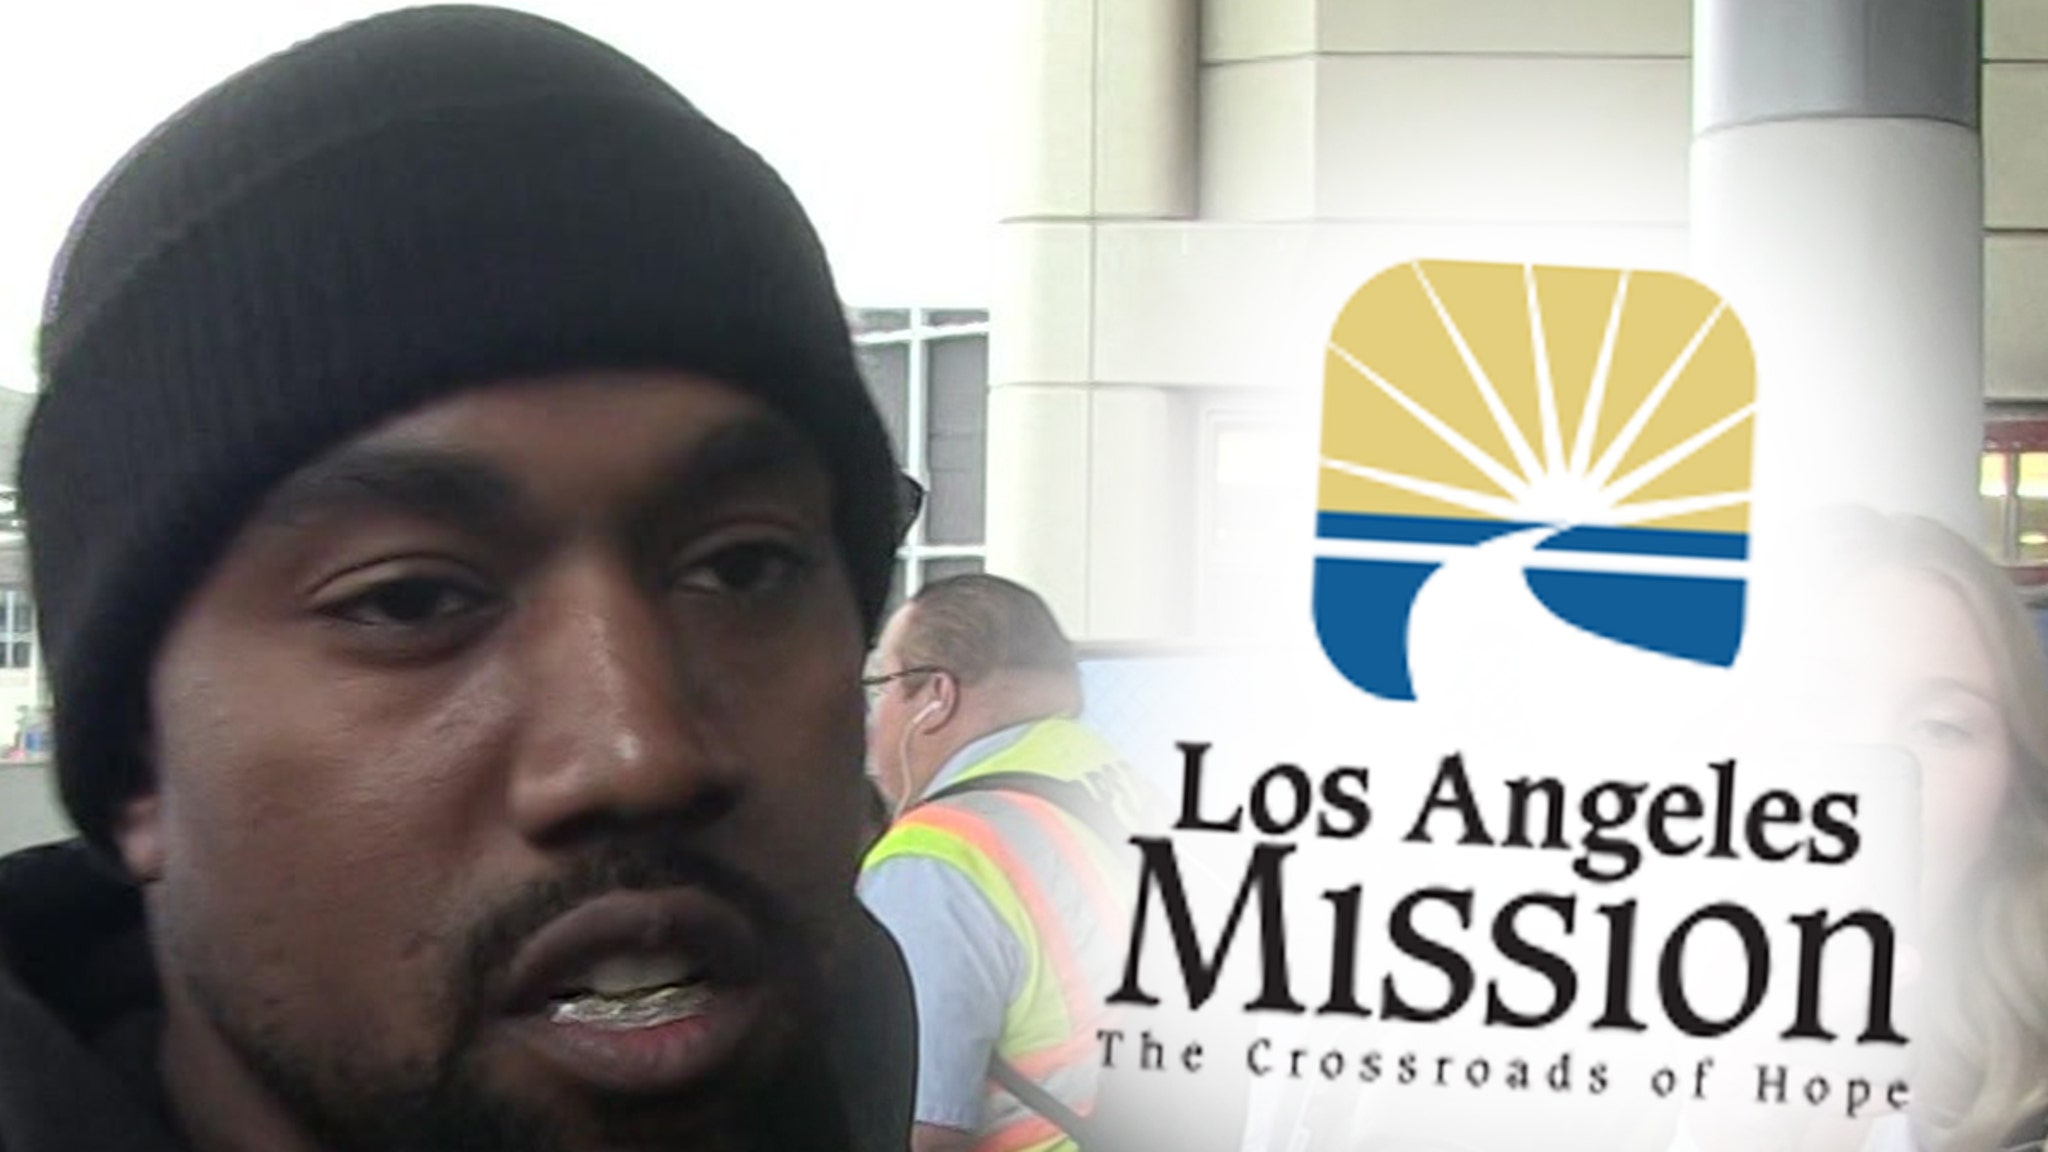 L.A. Shelter Frustrated by Kanye, Please Deliver What You Promised - TMZ : A homeless shelter in Los Angeles wants to get back on track with Kanye West after having initial meetings with him last year on how he can help.  | Tranquility 國際社群